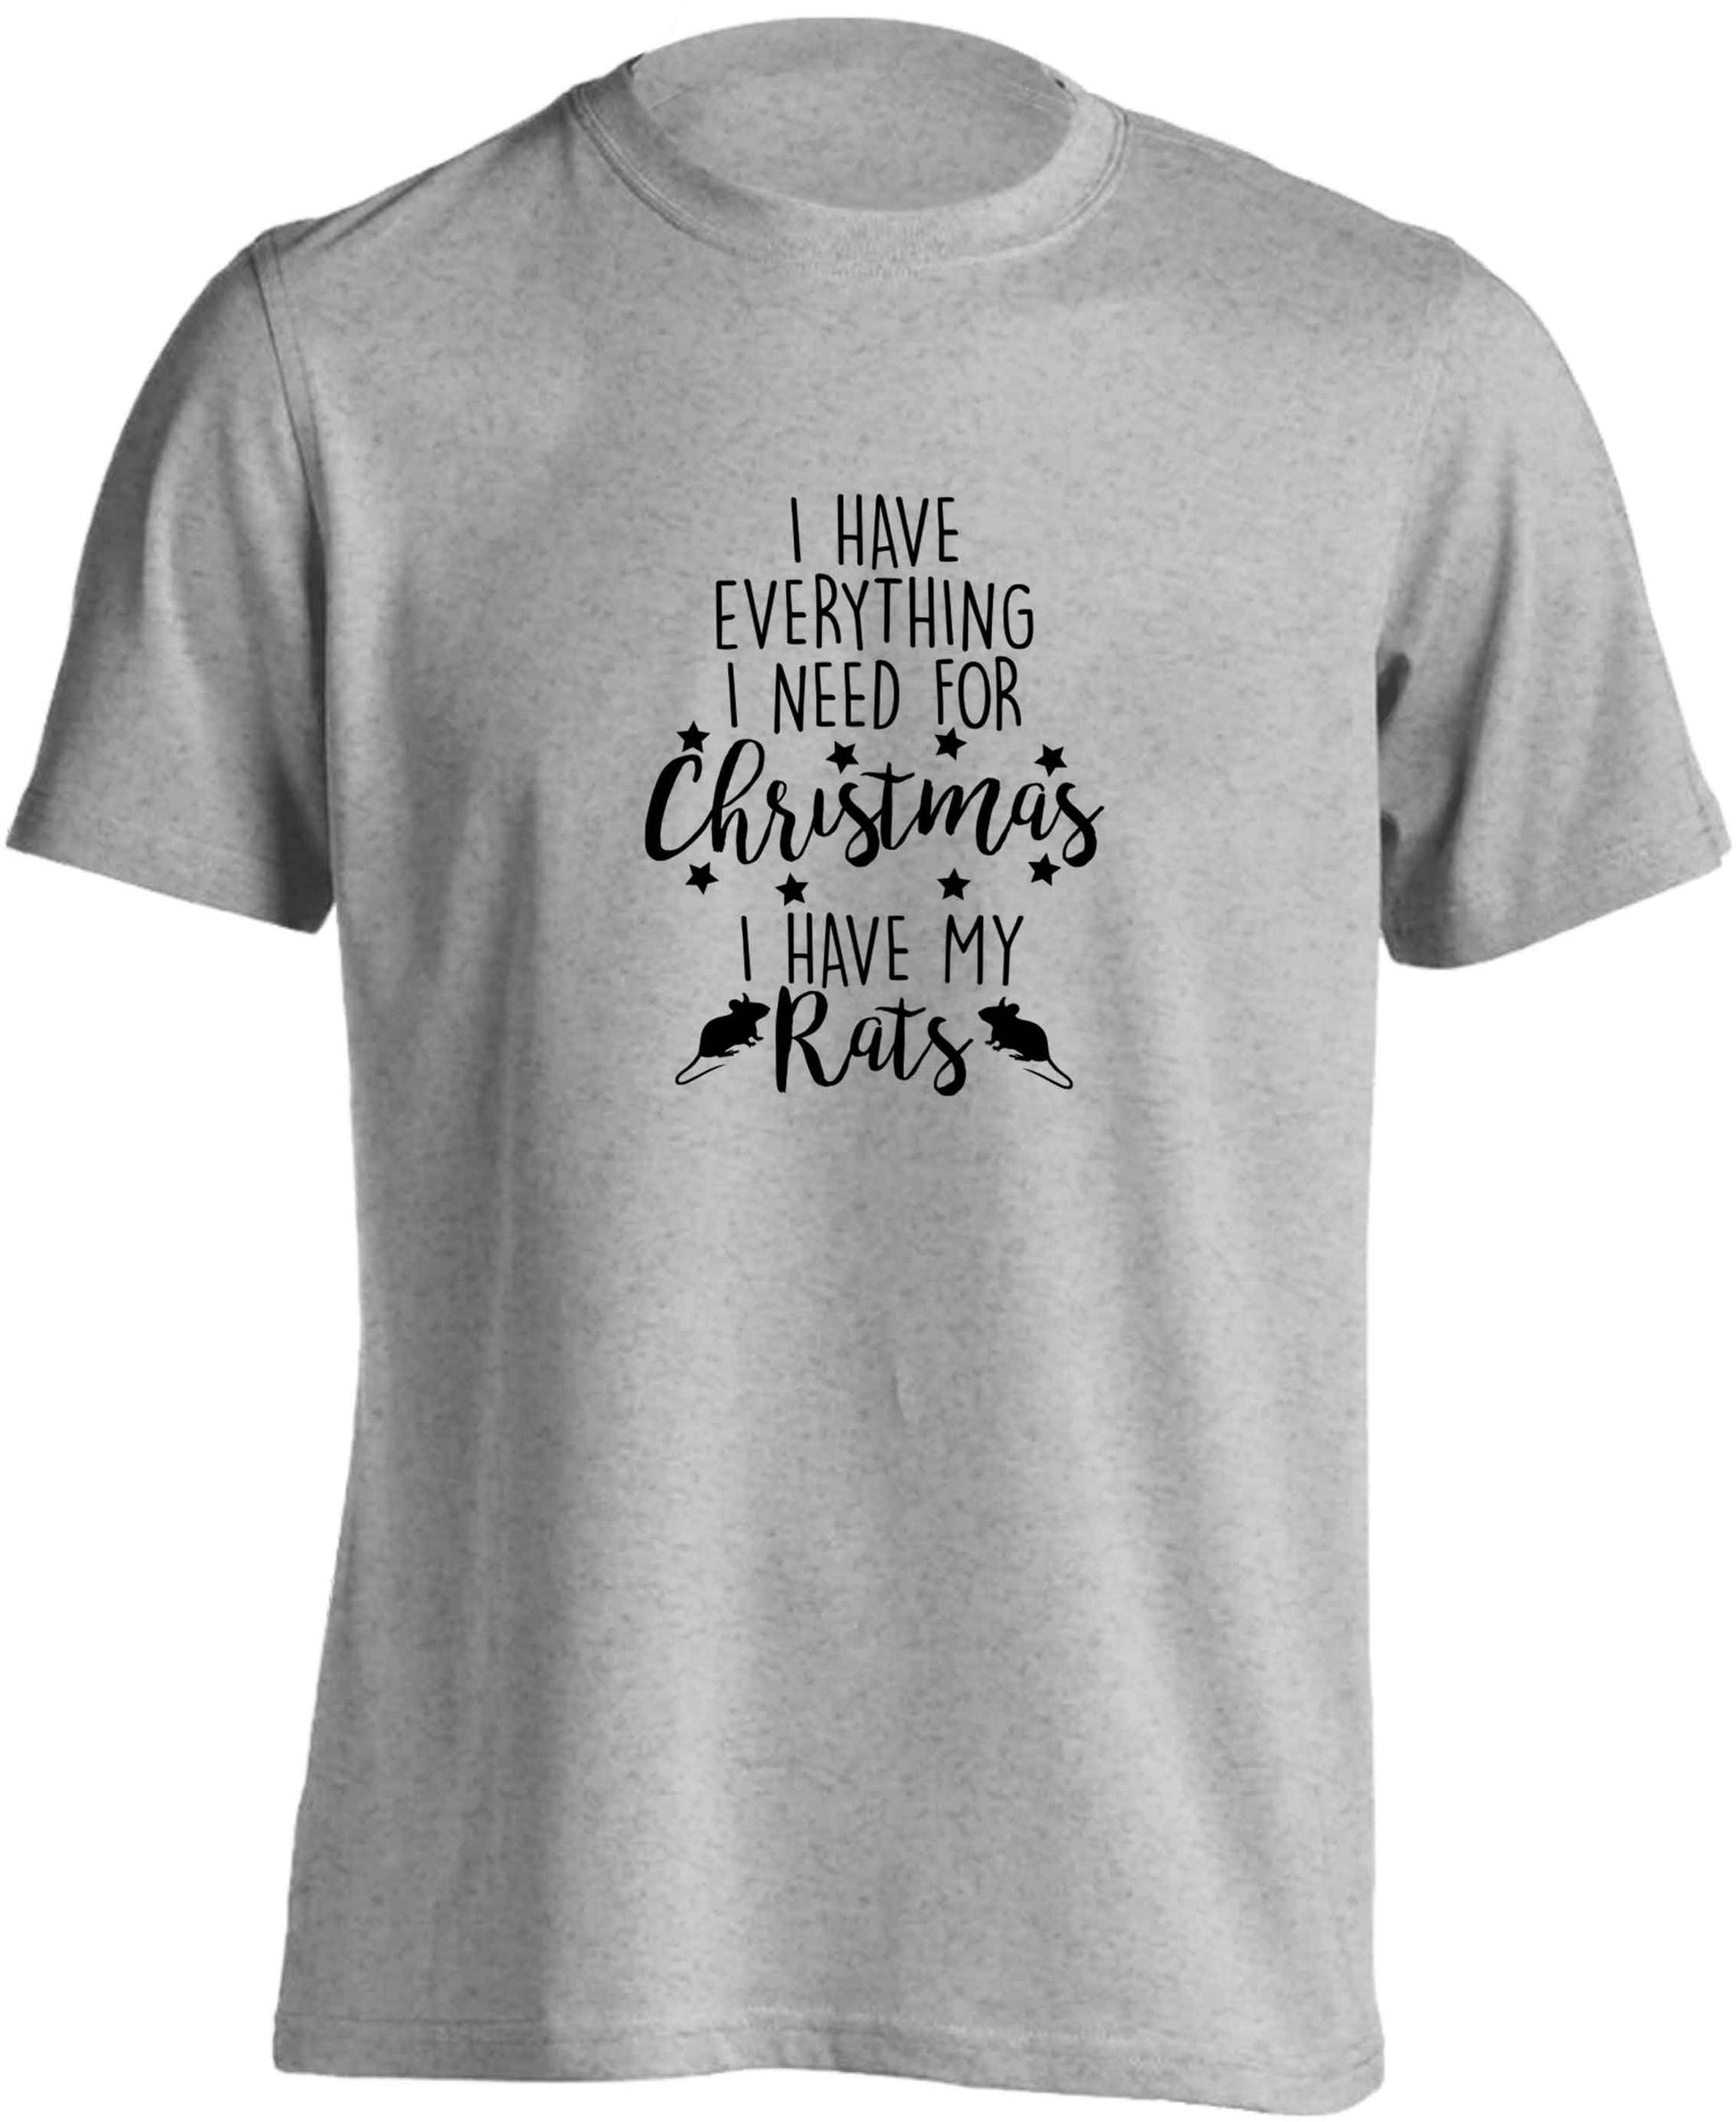 I have everything I need for Christmas I have my rats adults unisex grey Tshirt 2XL